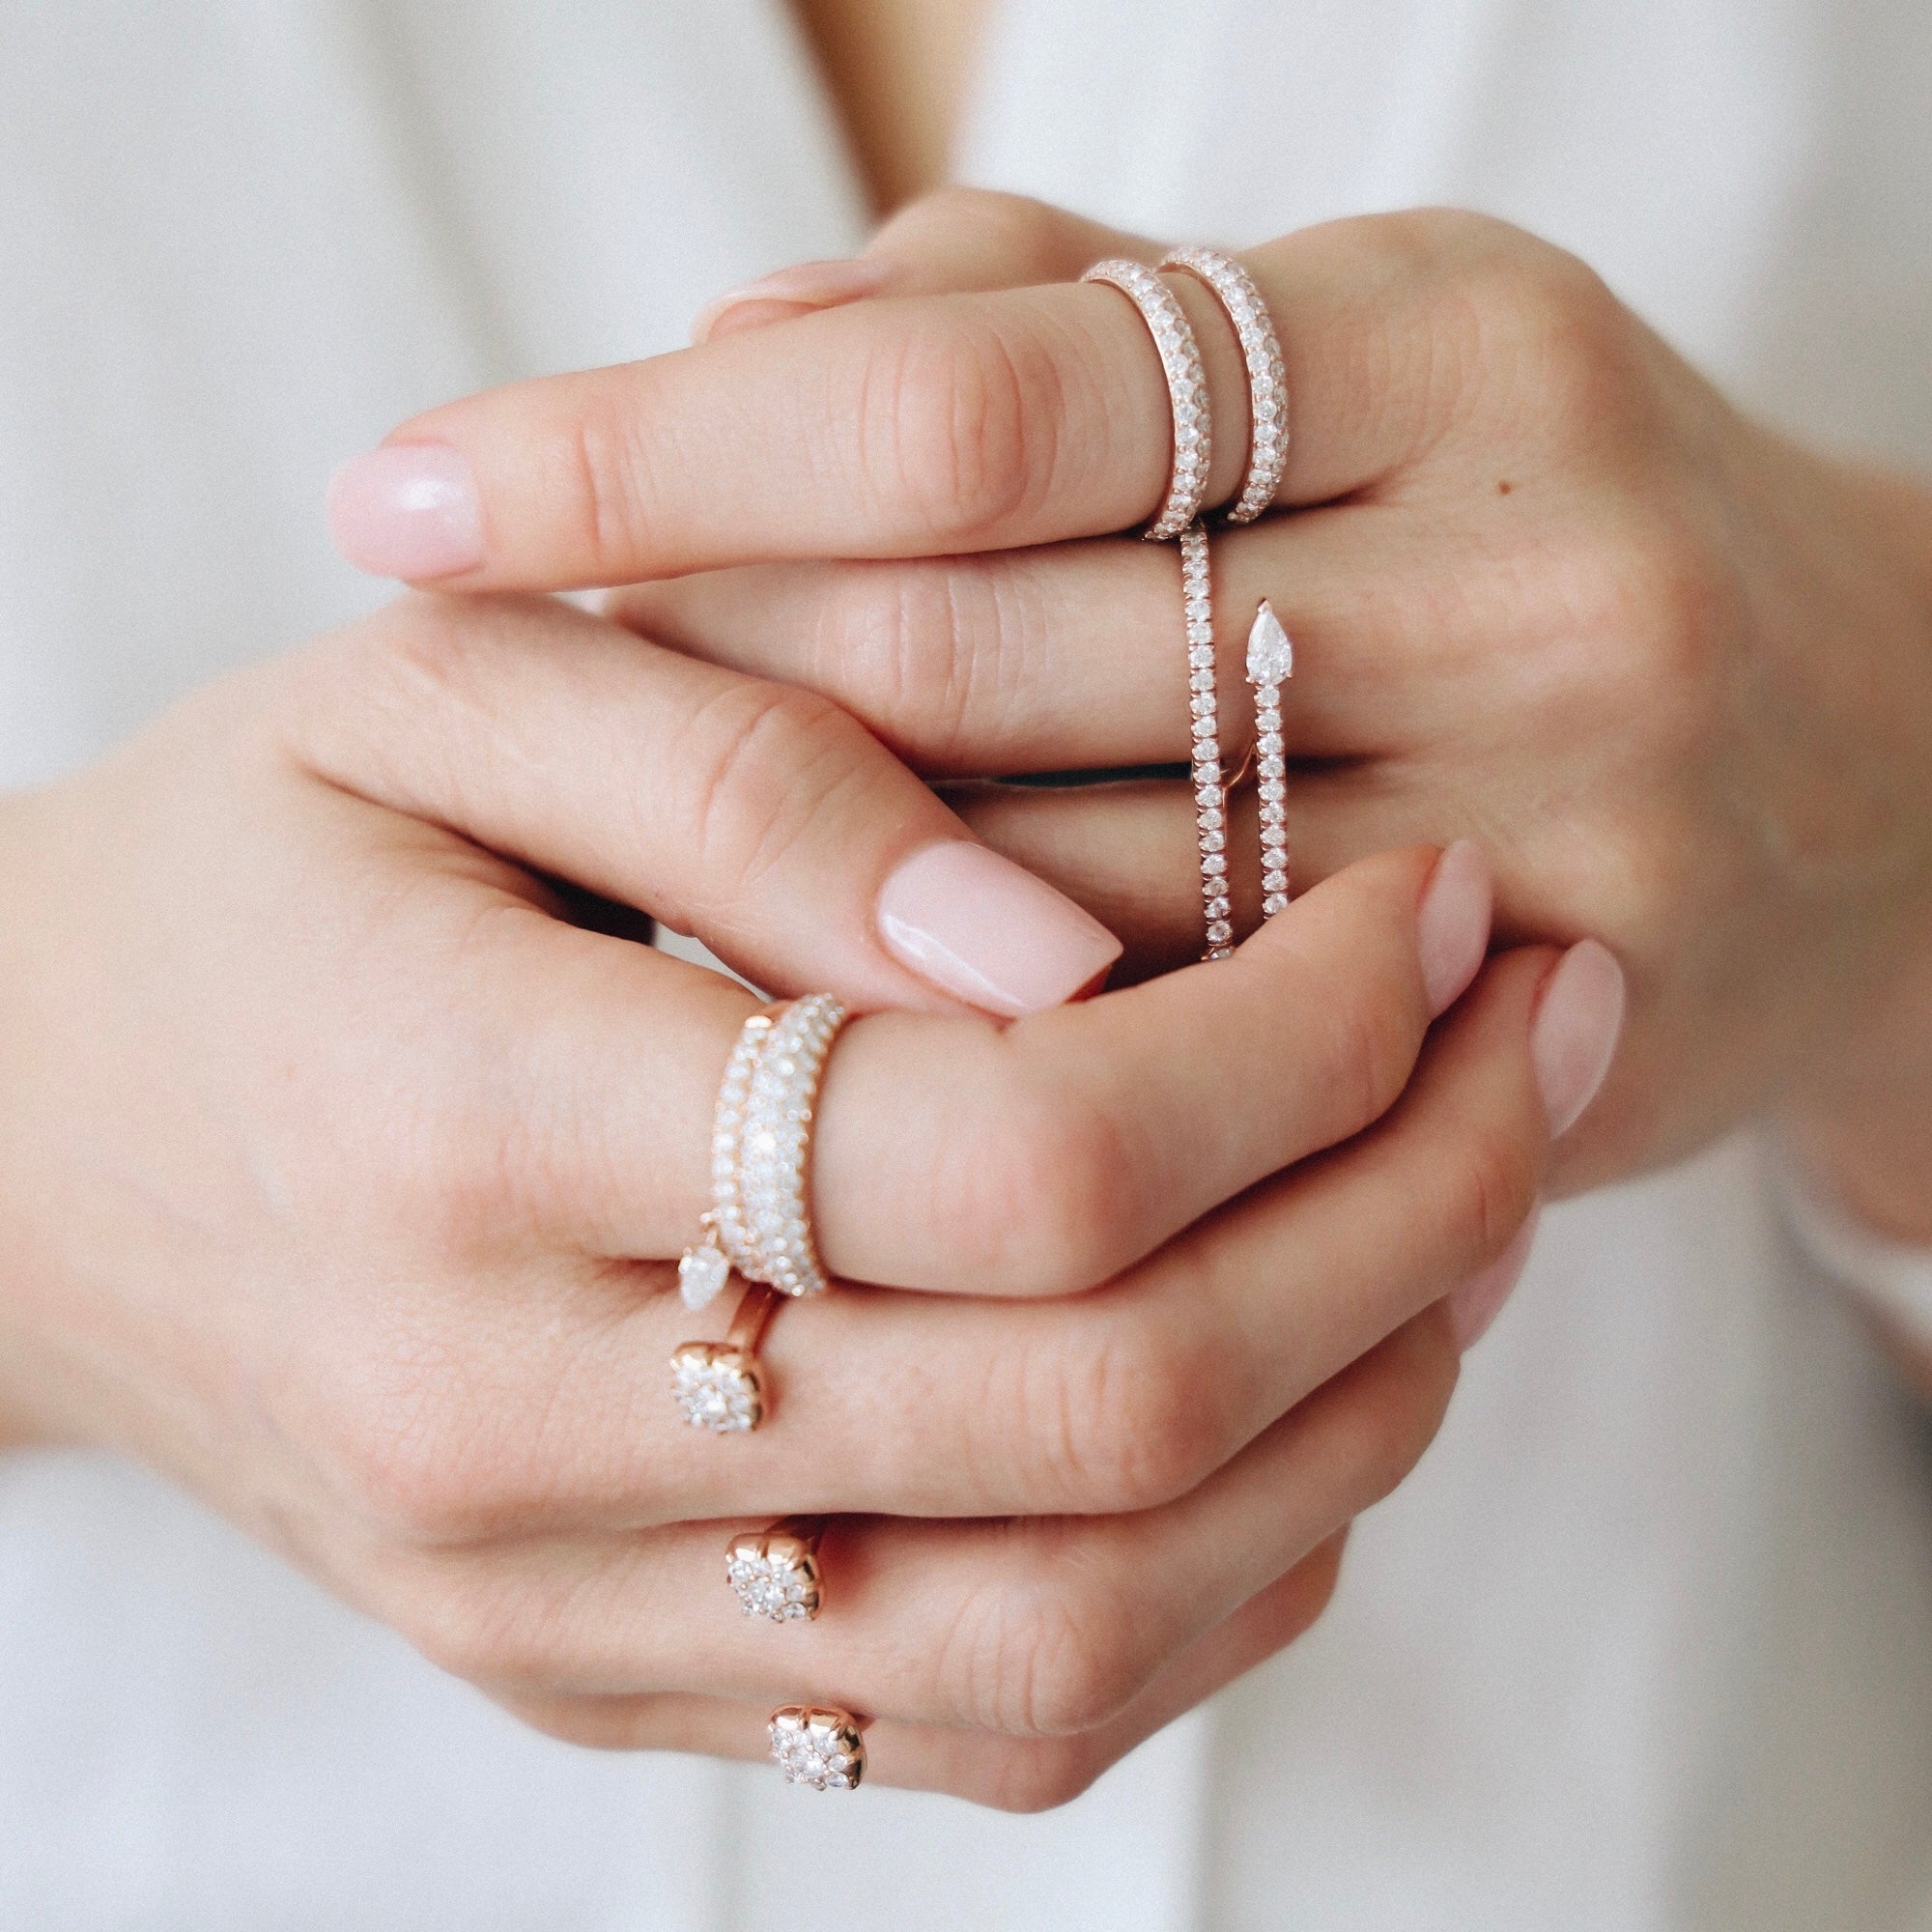 Trilogy Ring shown with the Dome Band and Neptune Ring.